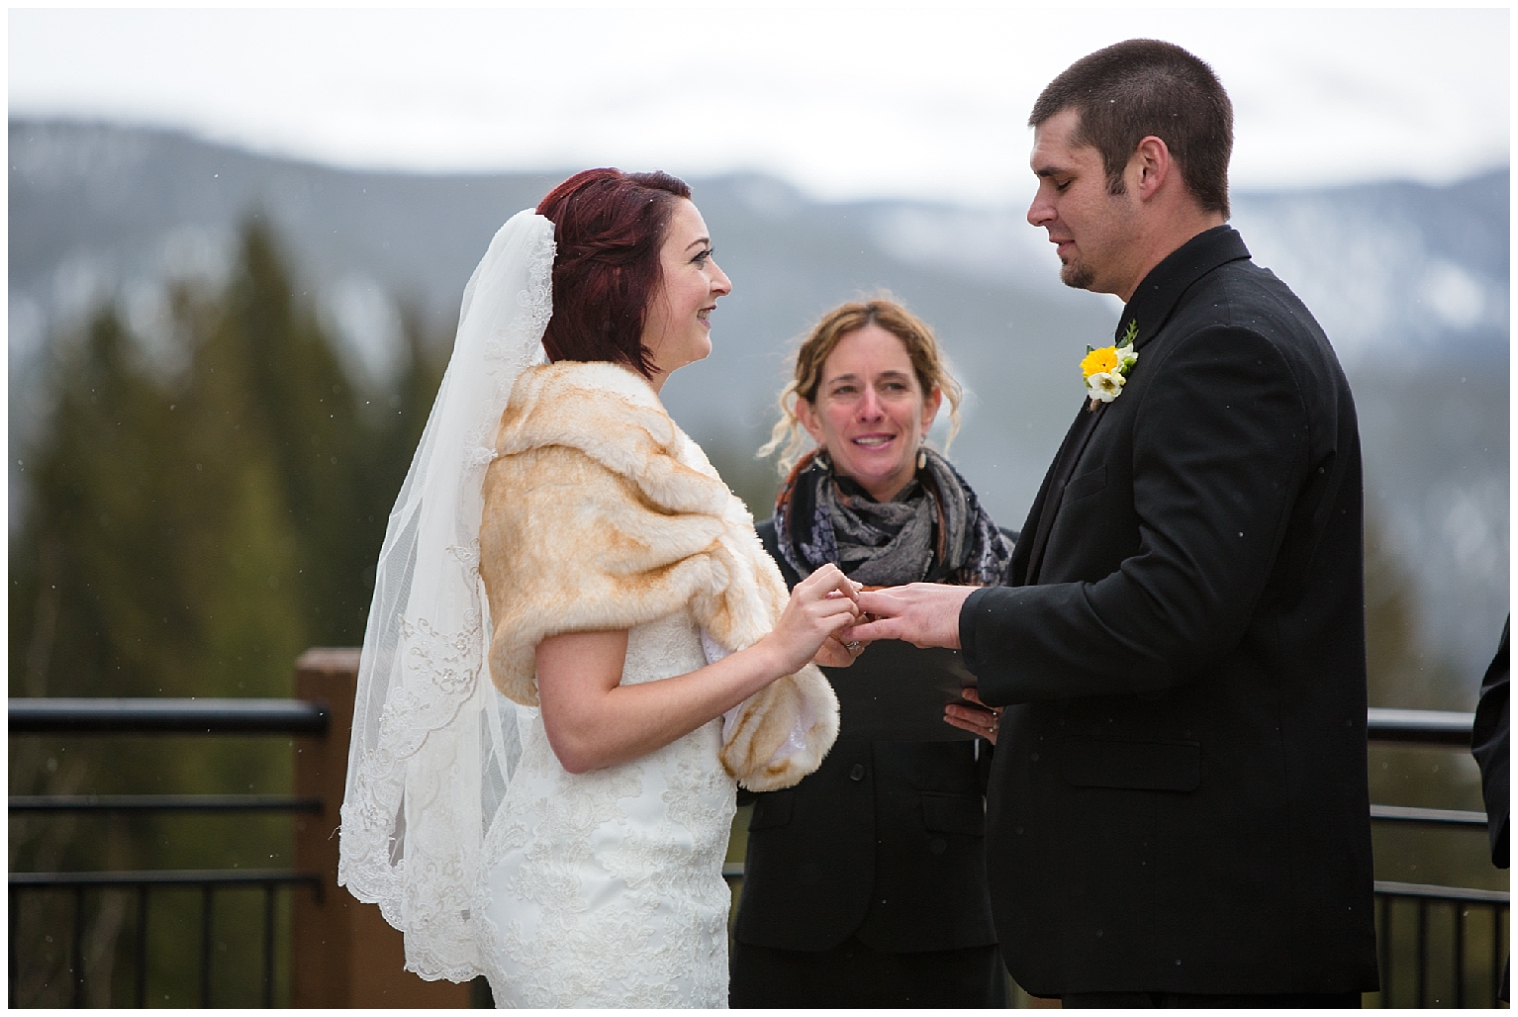 Bride places the ring on the groom during their Colorado mountain wedding ceremony.